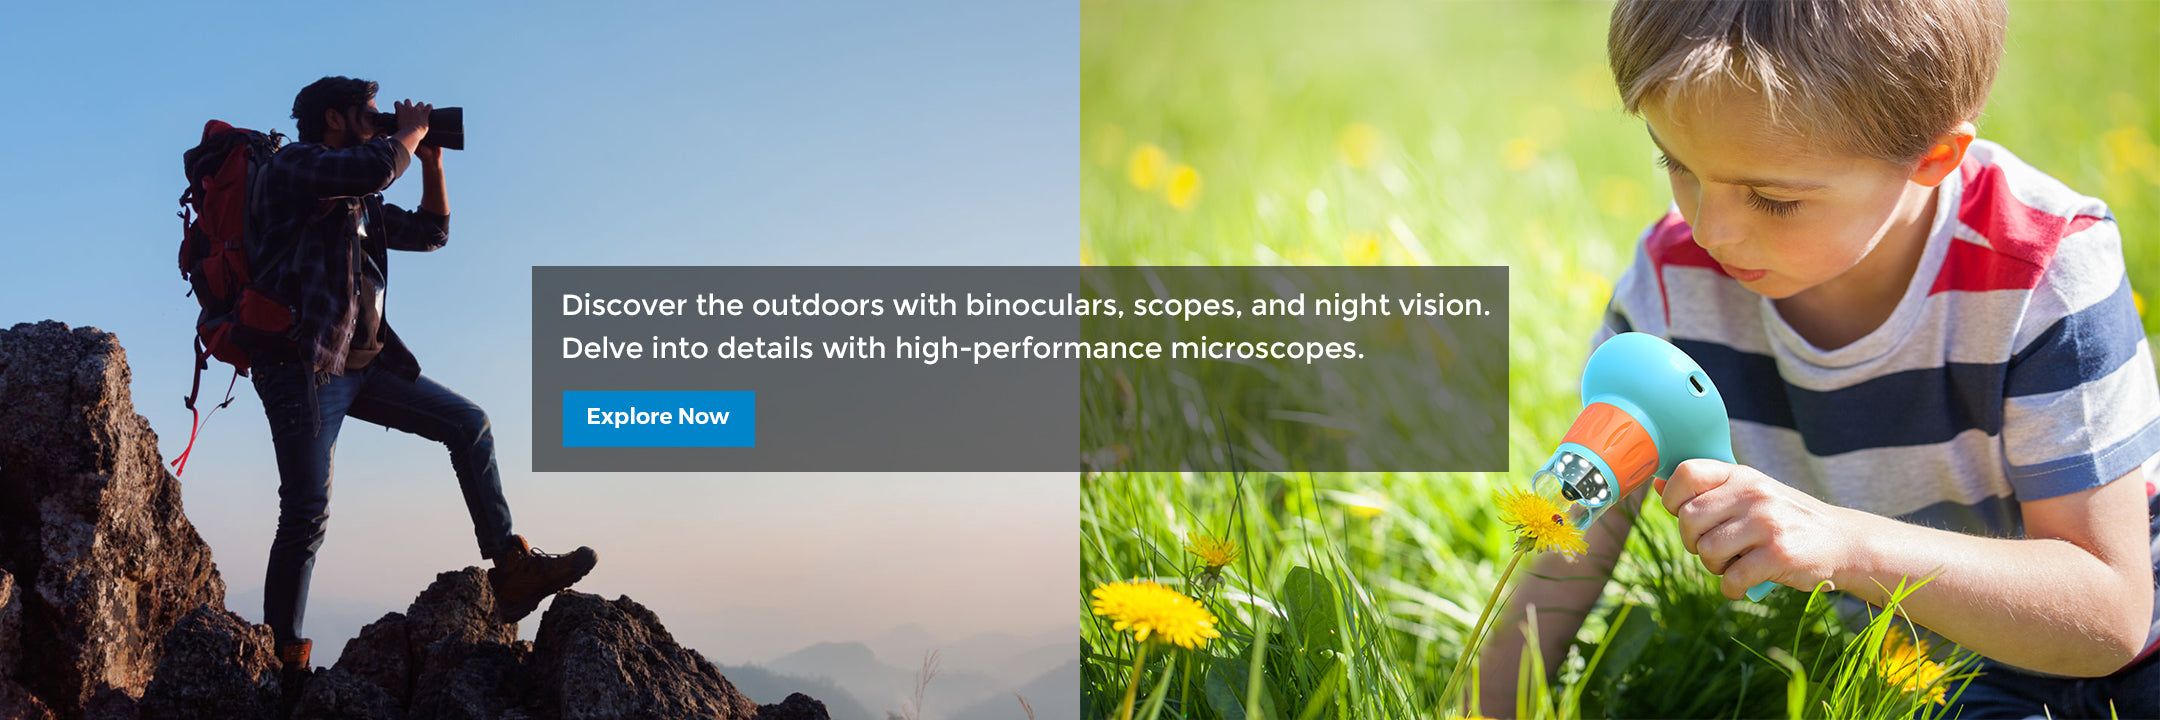 Discover the outdoors with binoculars, scopes, and night vision - Apexellens